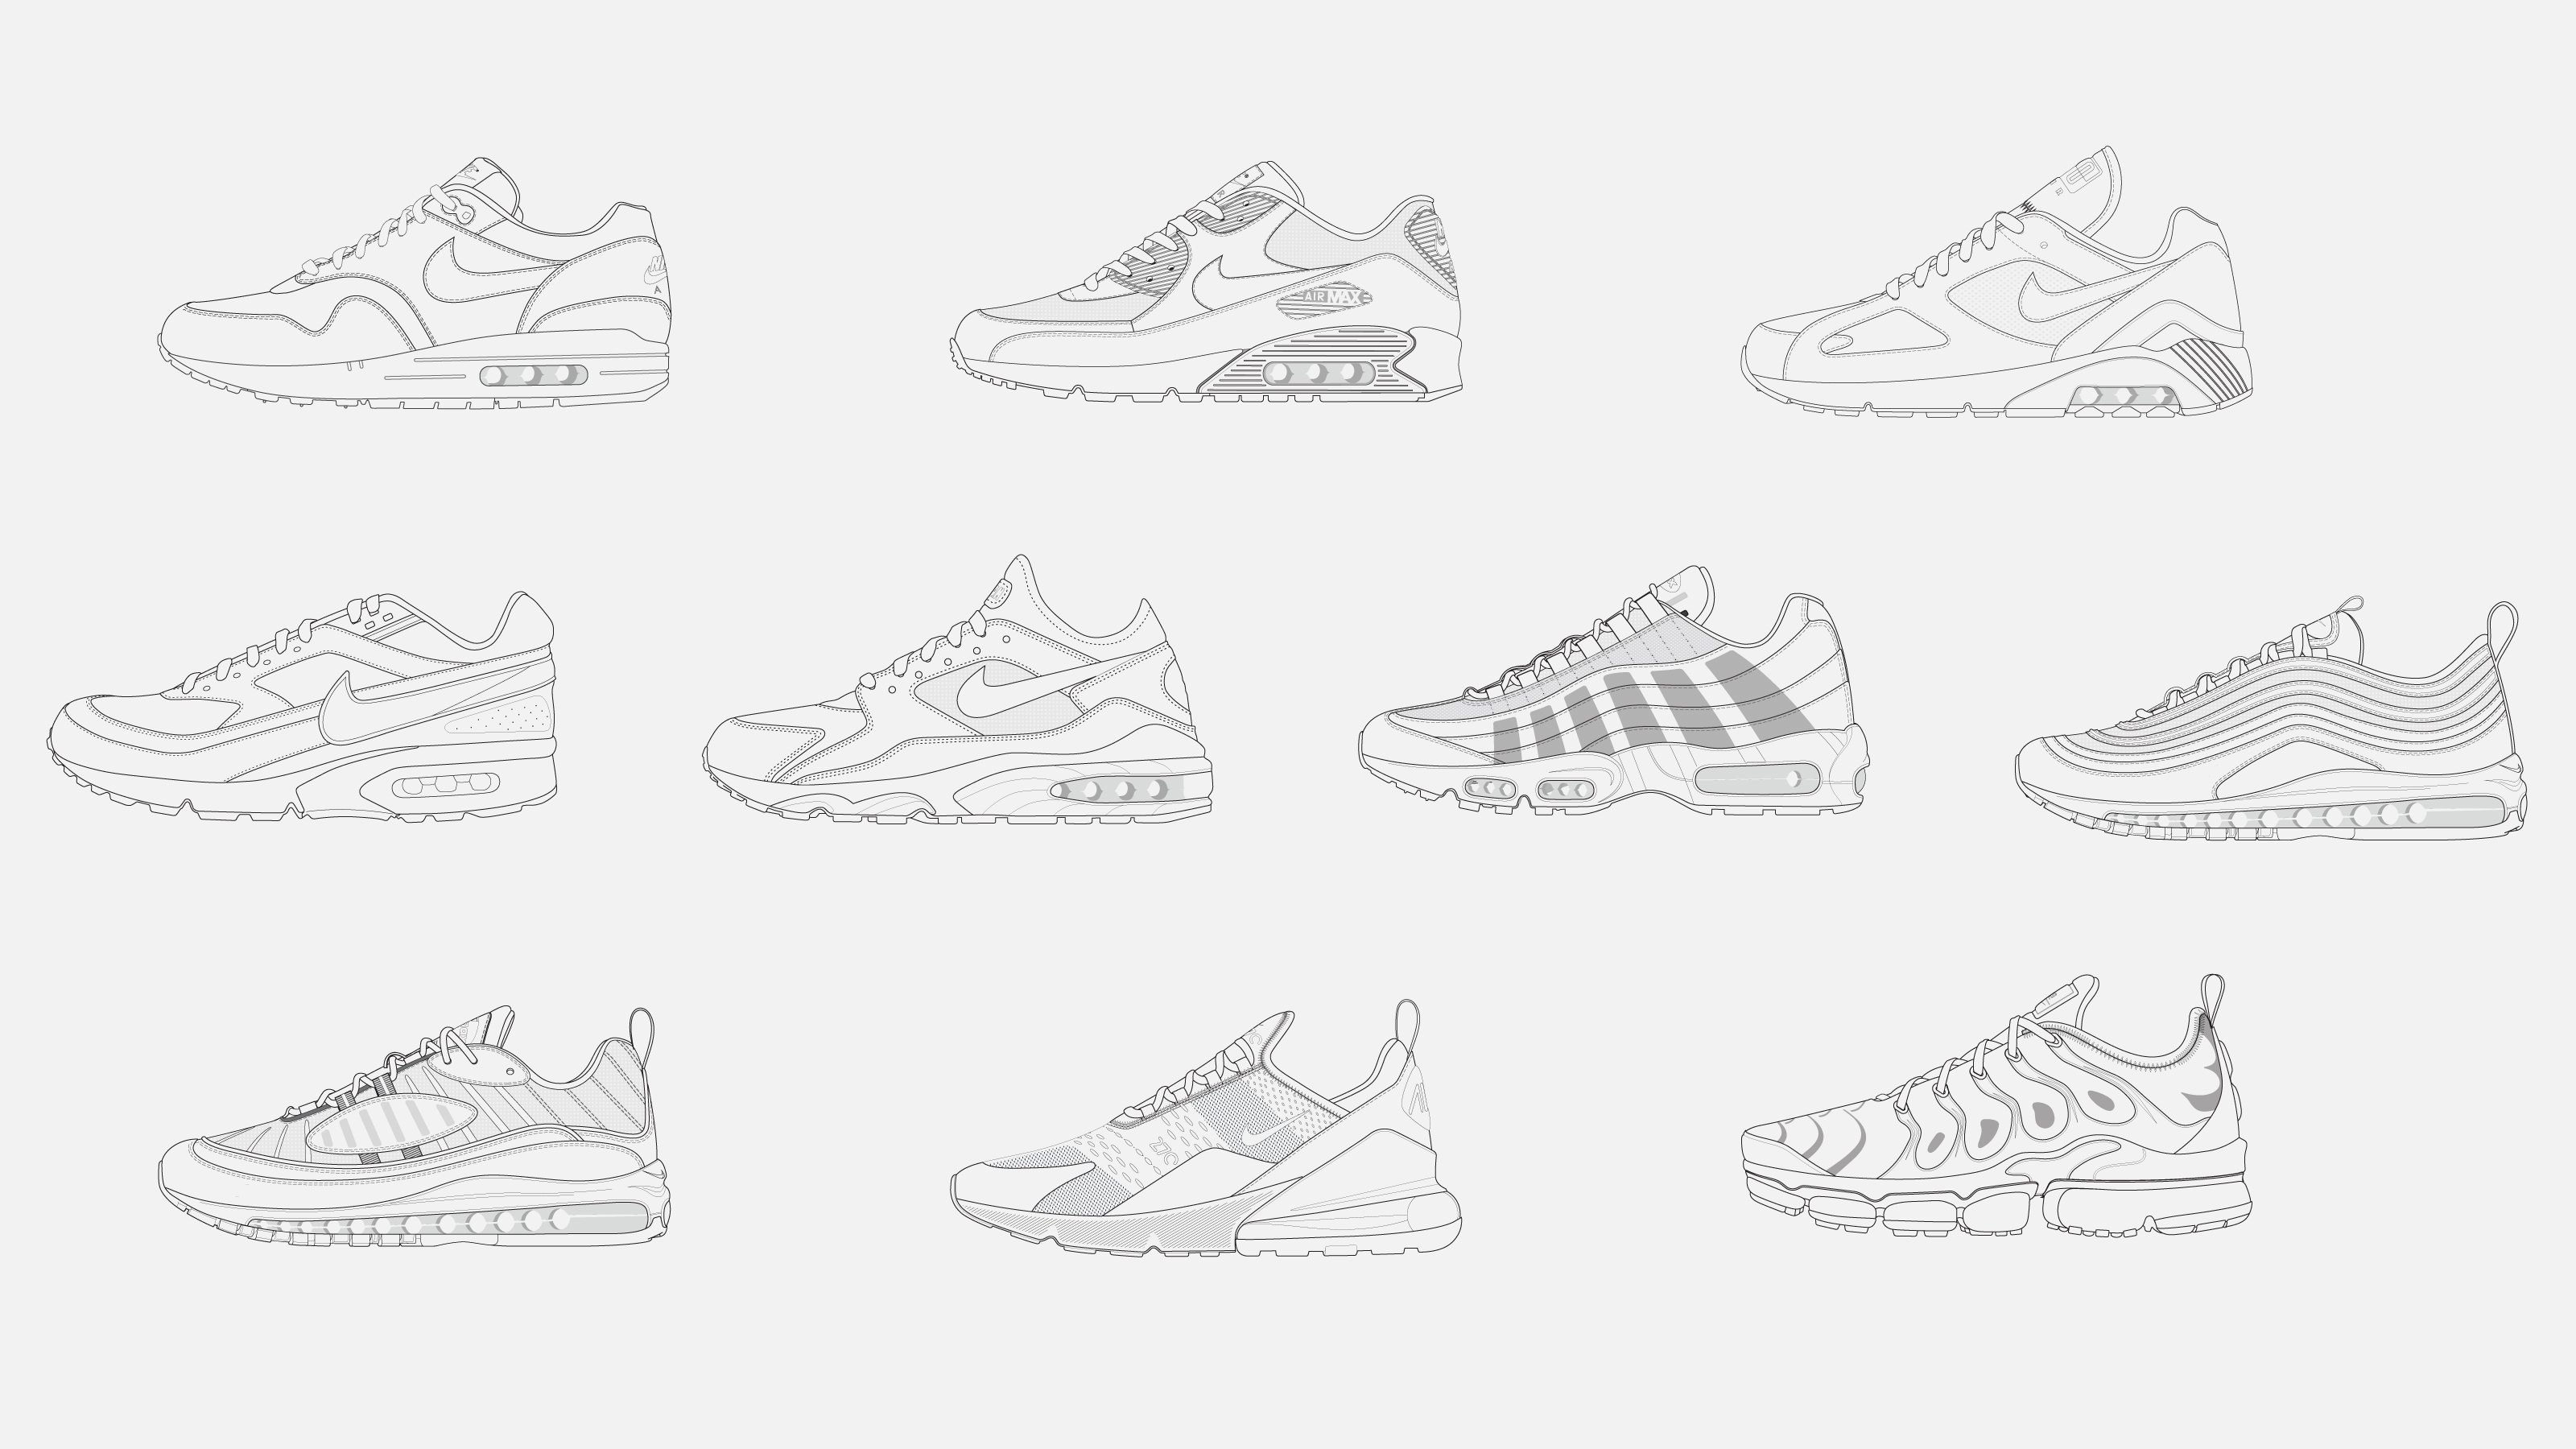 Hangen Faial George Eliot Nike Has Announced Its 'On Air' Design Contest Winners | Complex